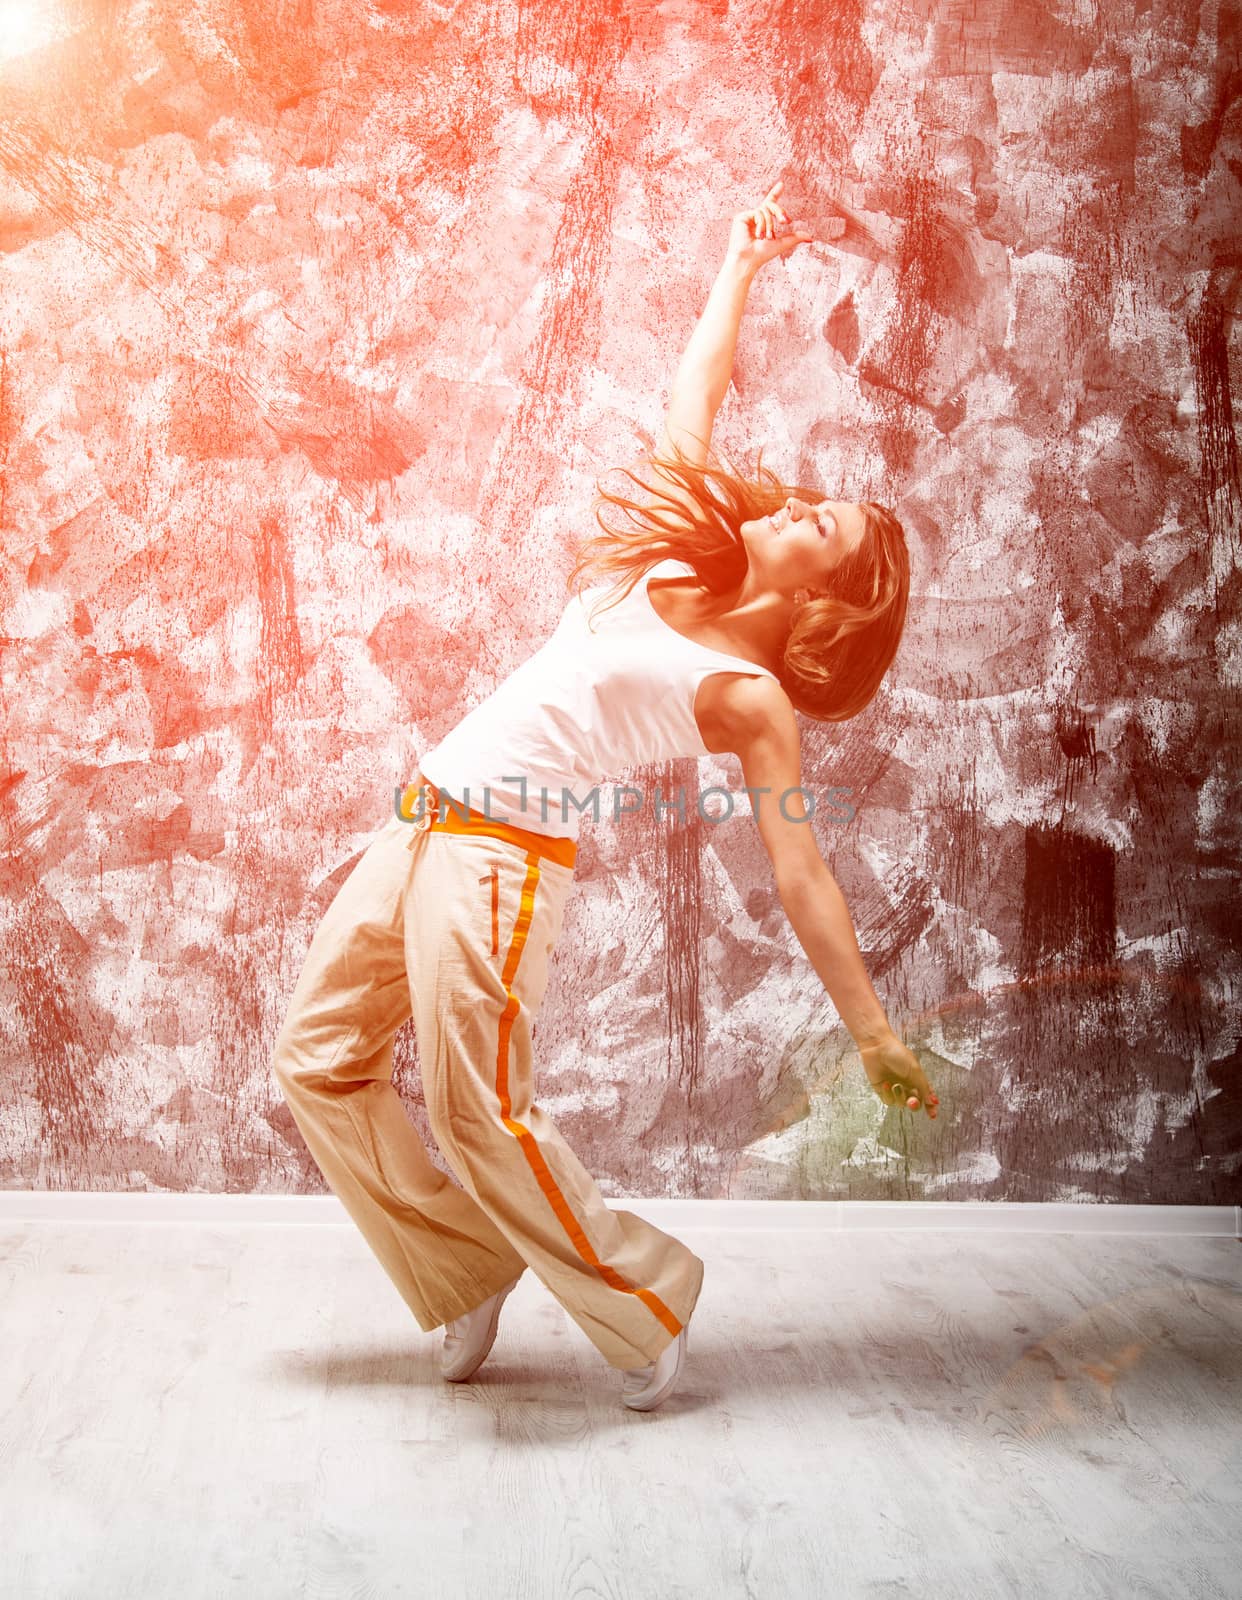 dancind girl on a gray grunge background